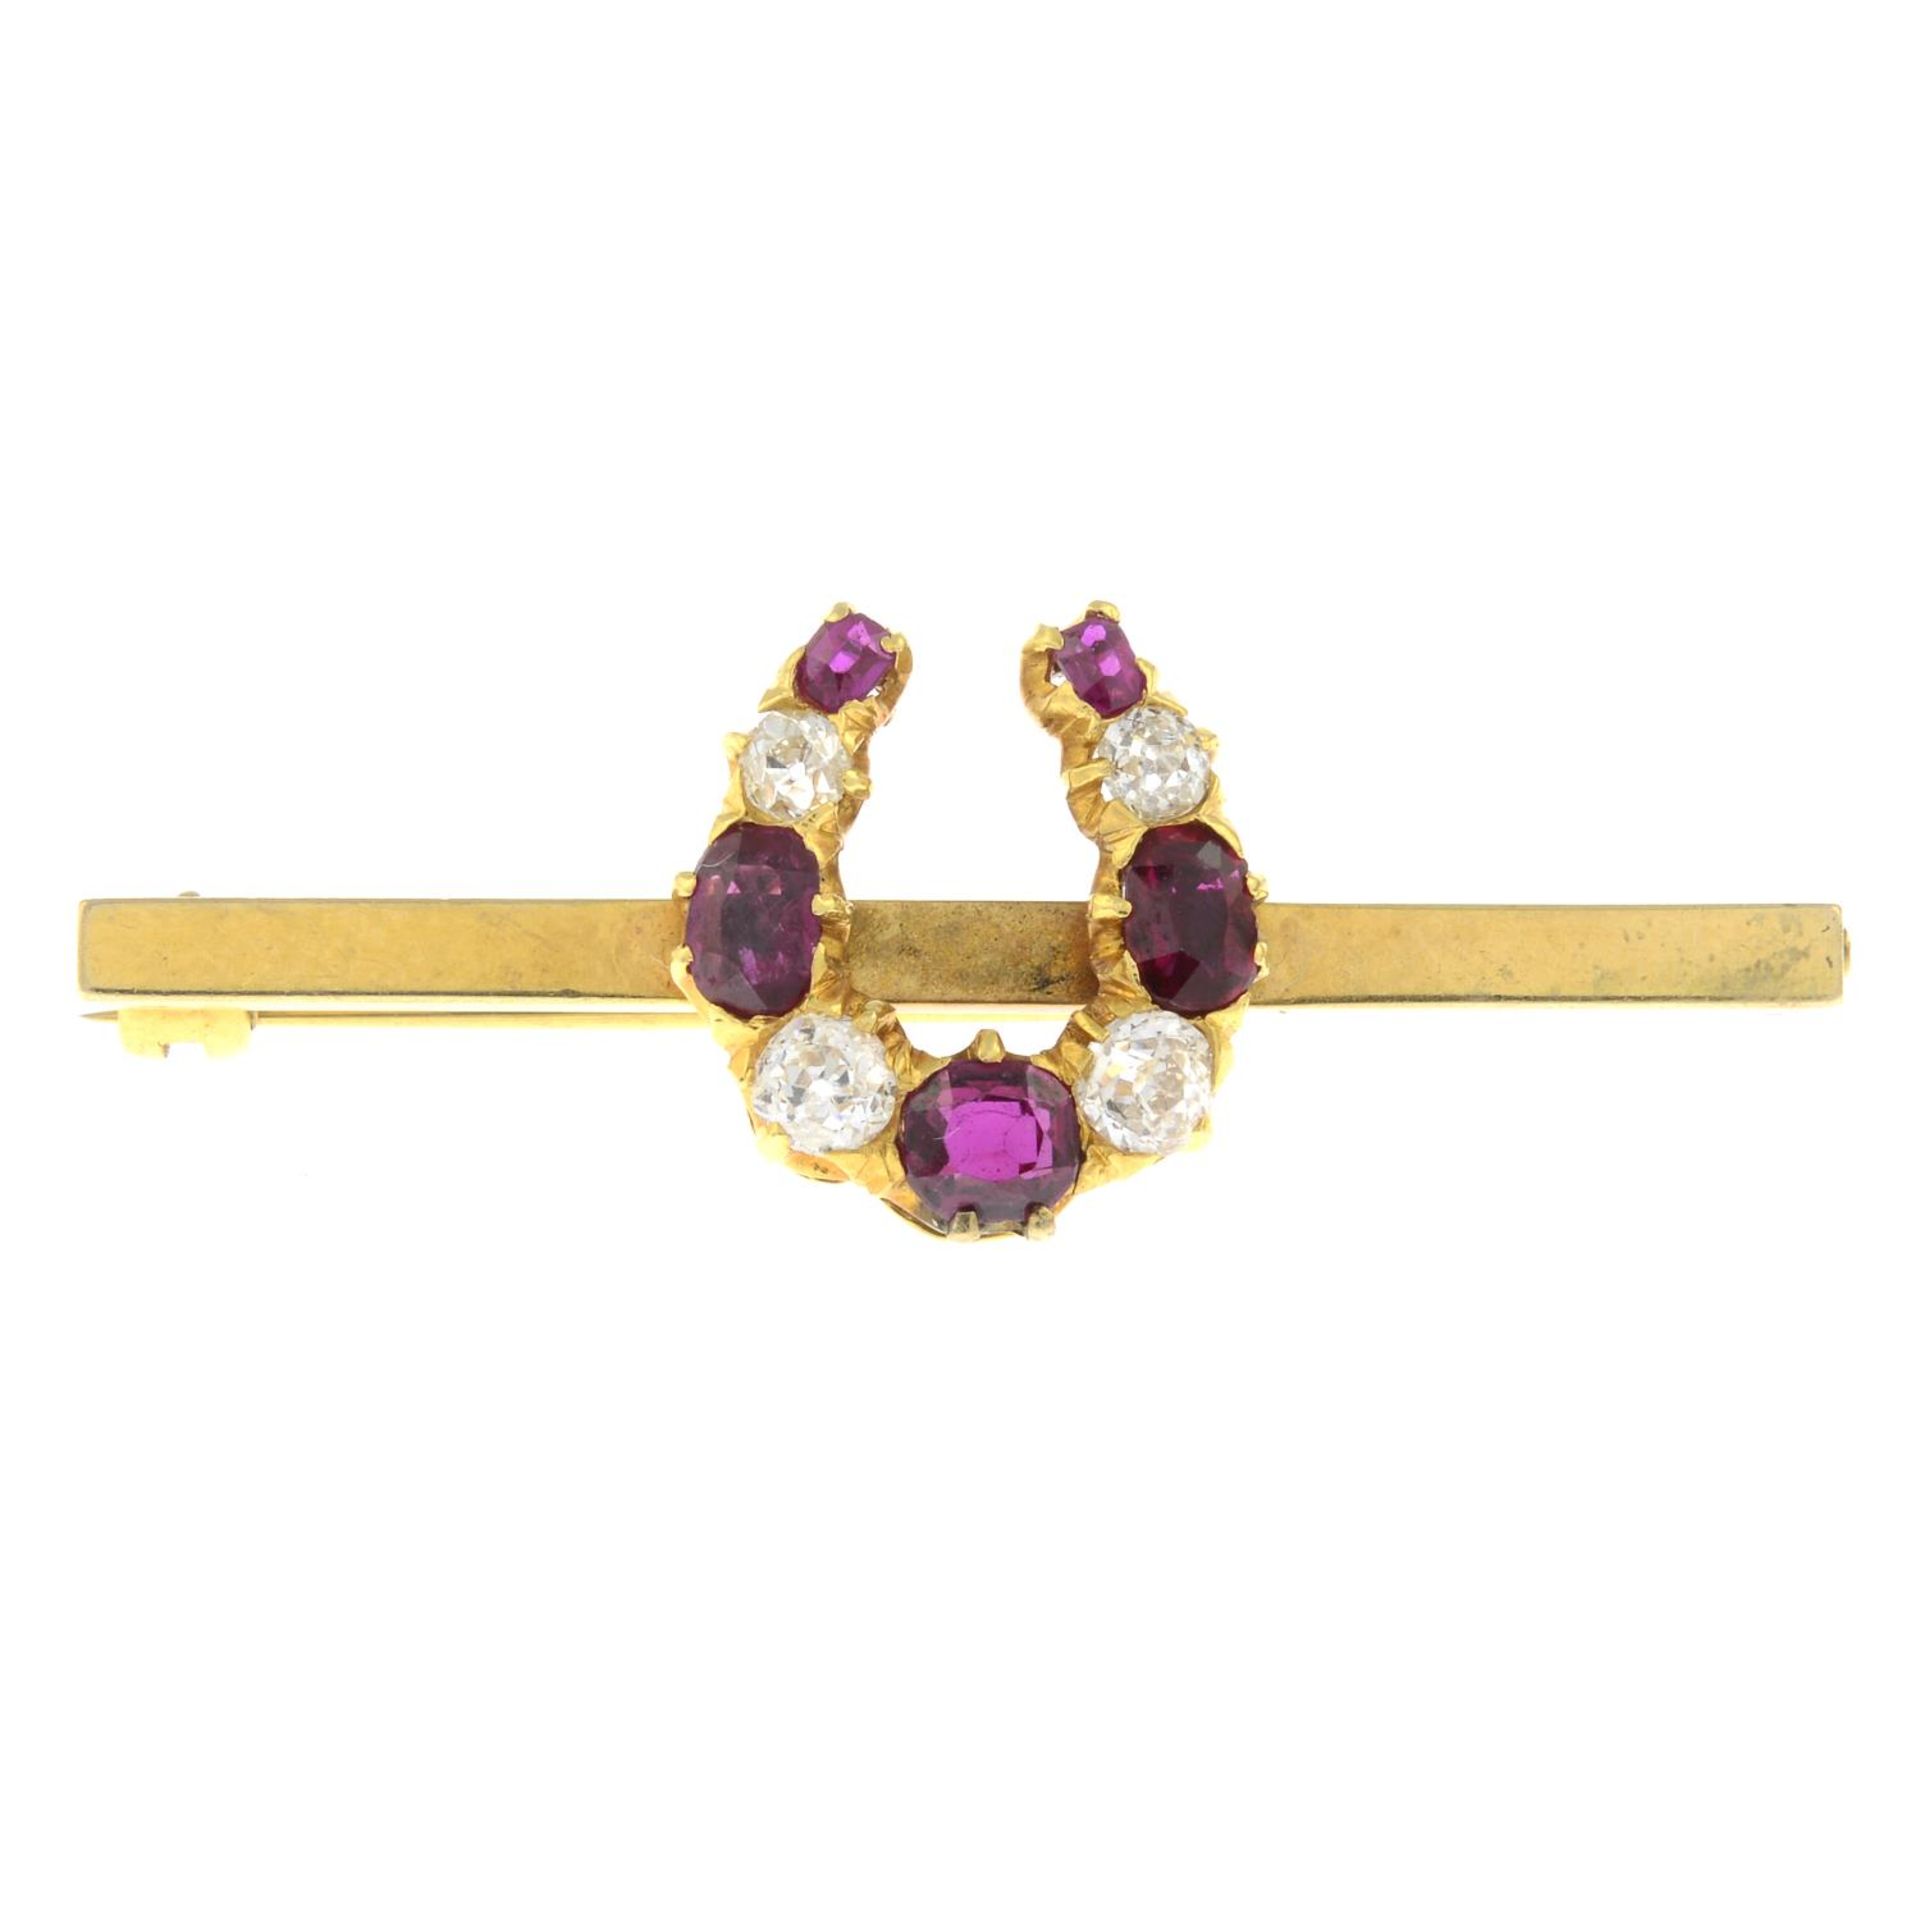 An early 20th century gold old-cut diamond and ruby horseshoe brooch.Estimated total diamond weight